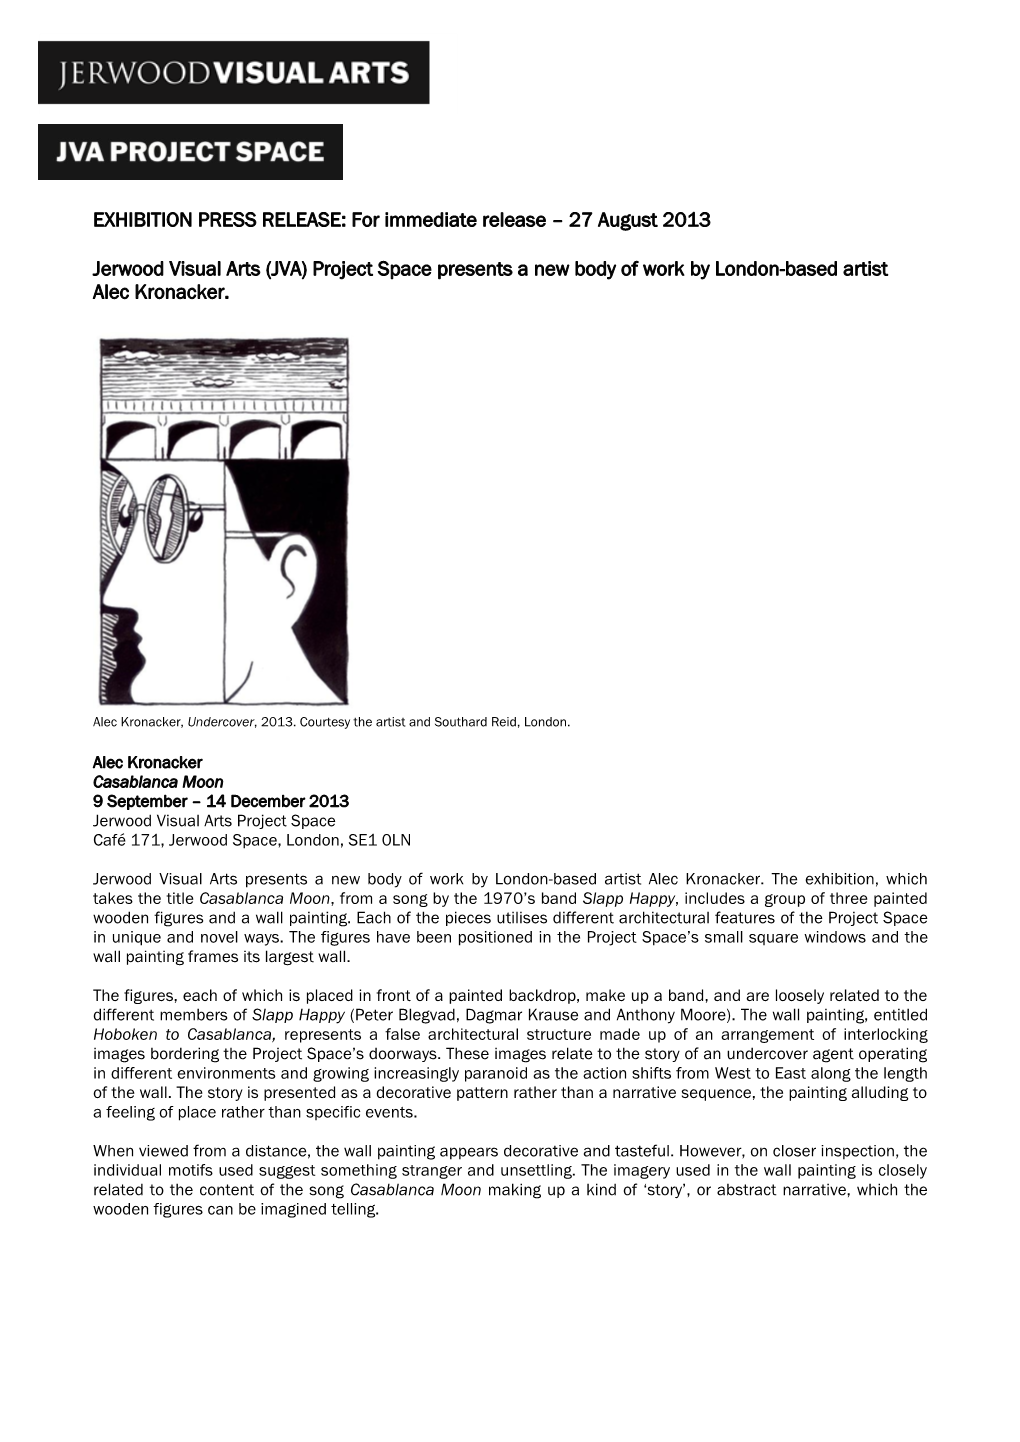 EXHIBITION PRESS RELEASE: for Immediate Release – 27 August 2013